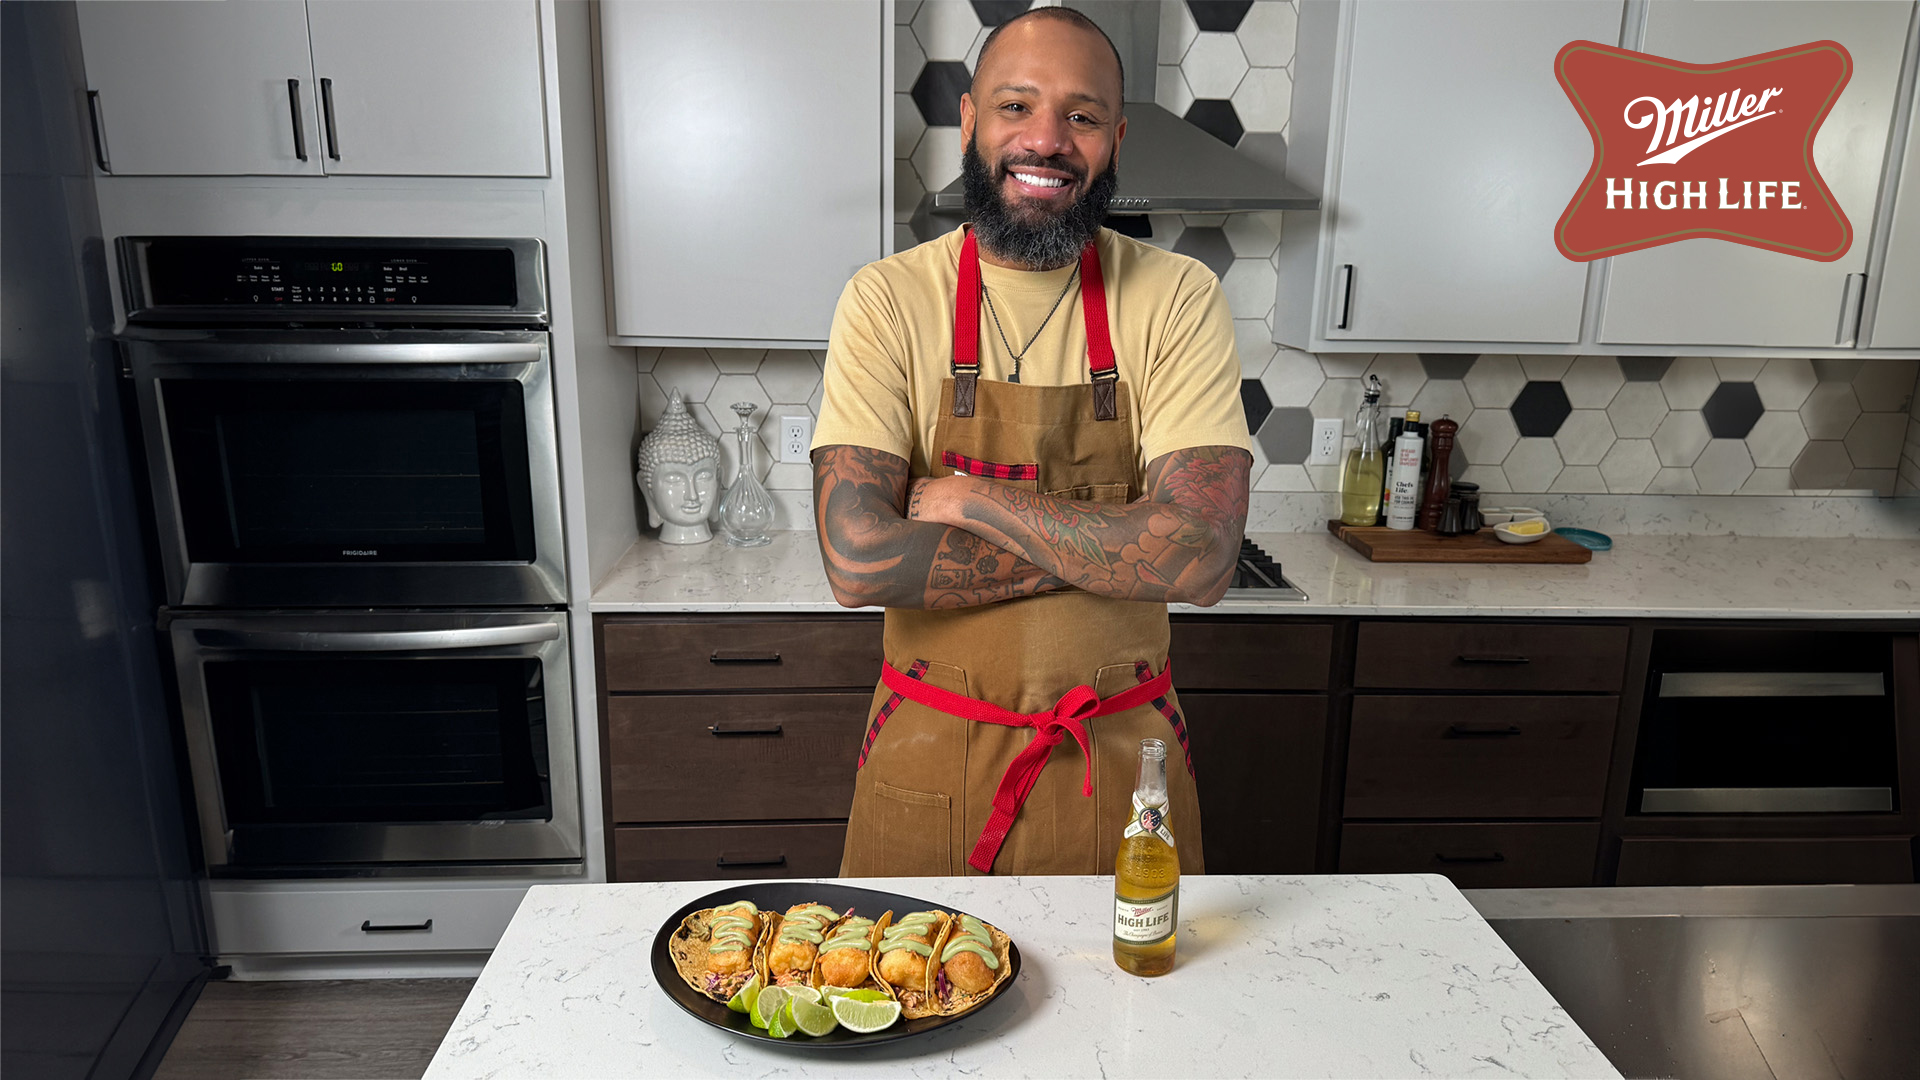 Justin Sutherland with recipe and Miller High Life Bottle